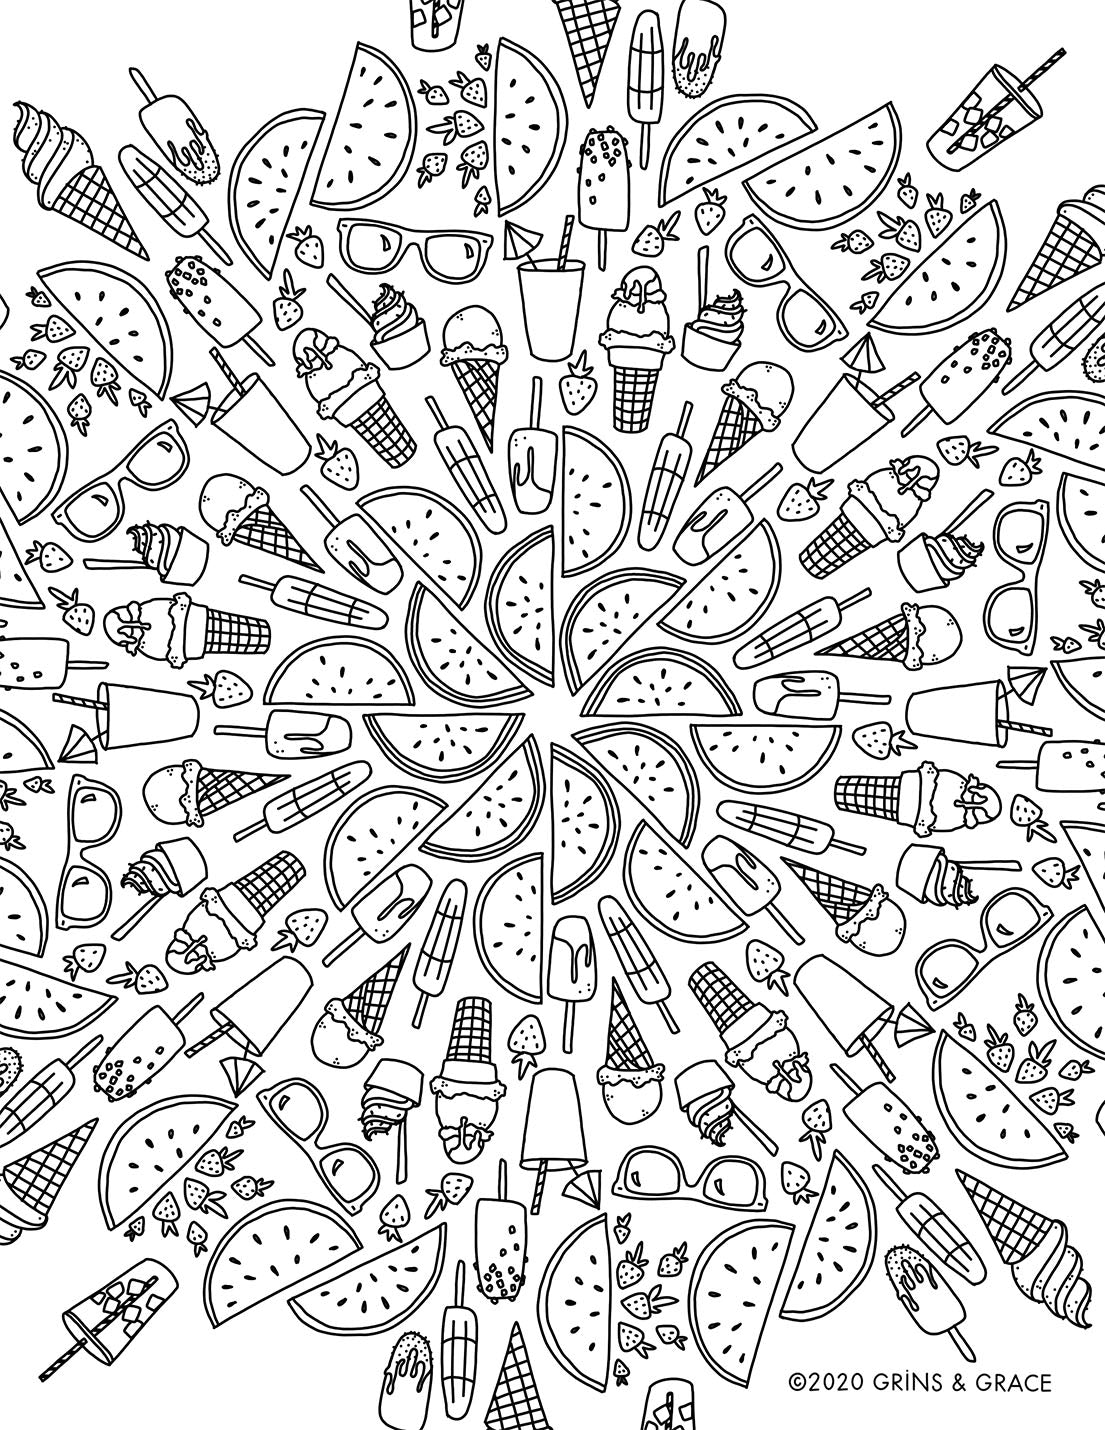 Summer fun freebie coloring pages by grins grace